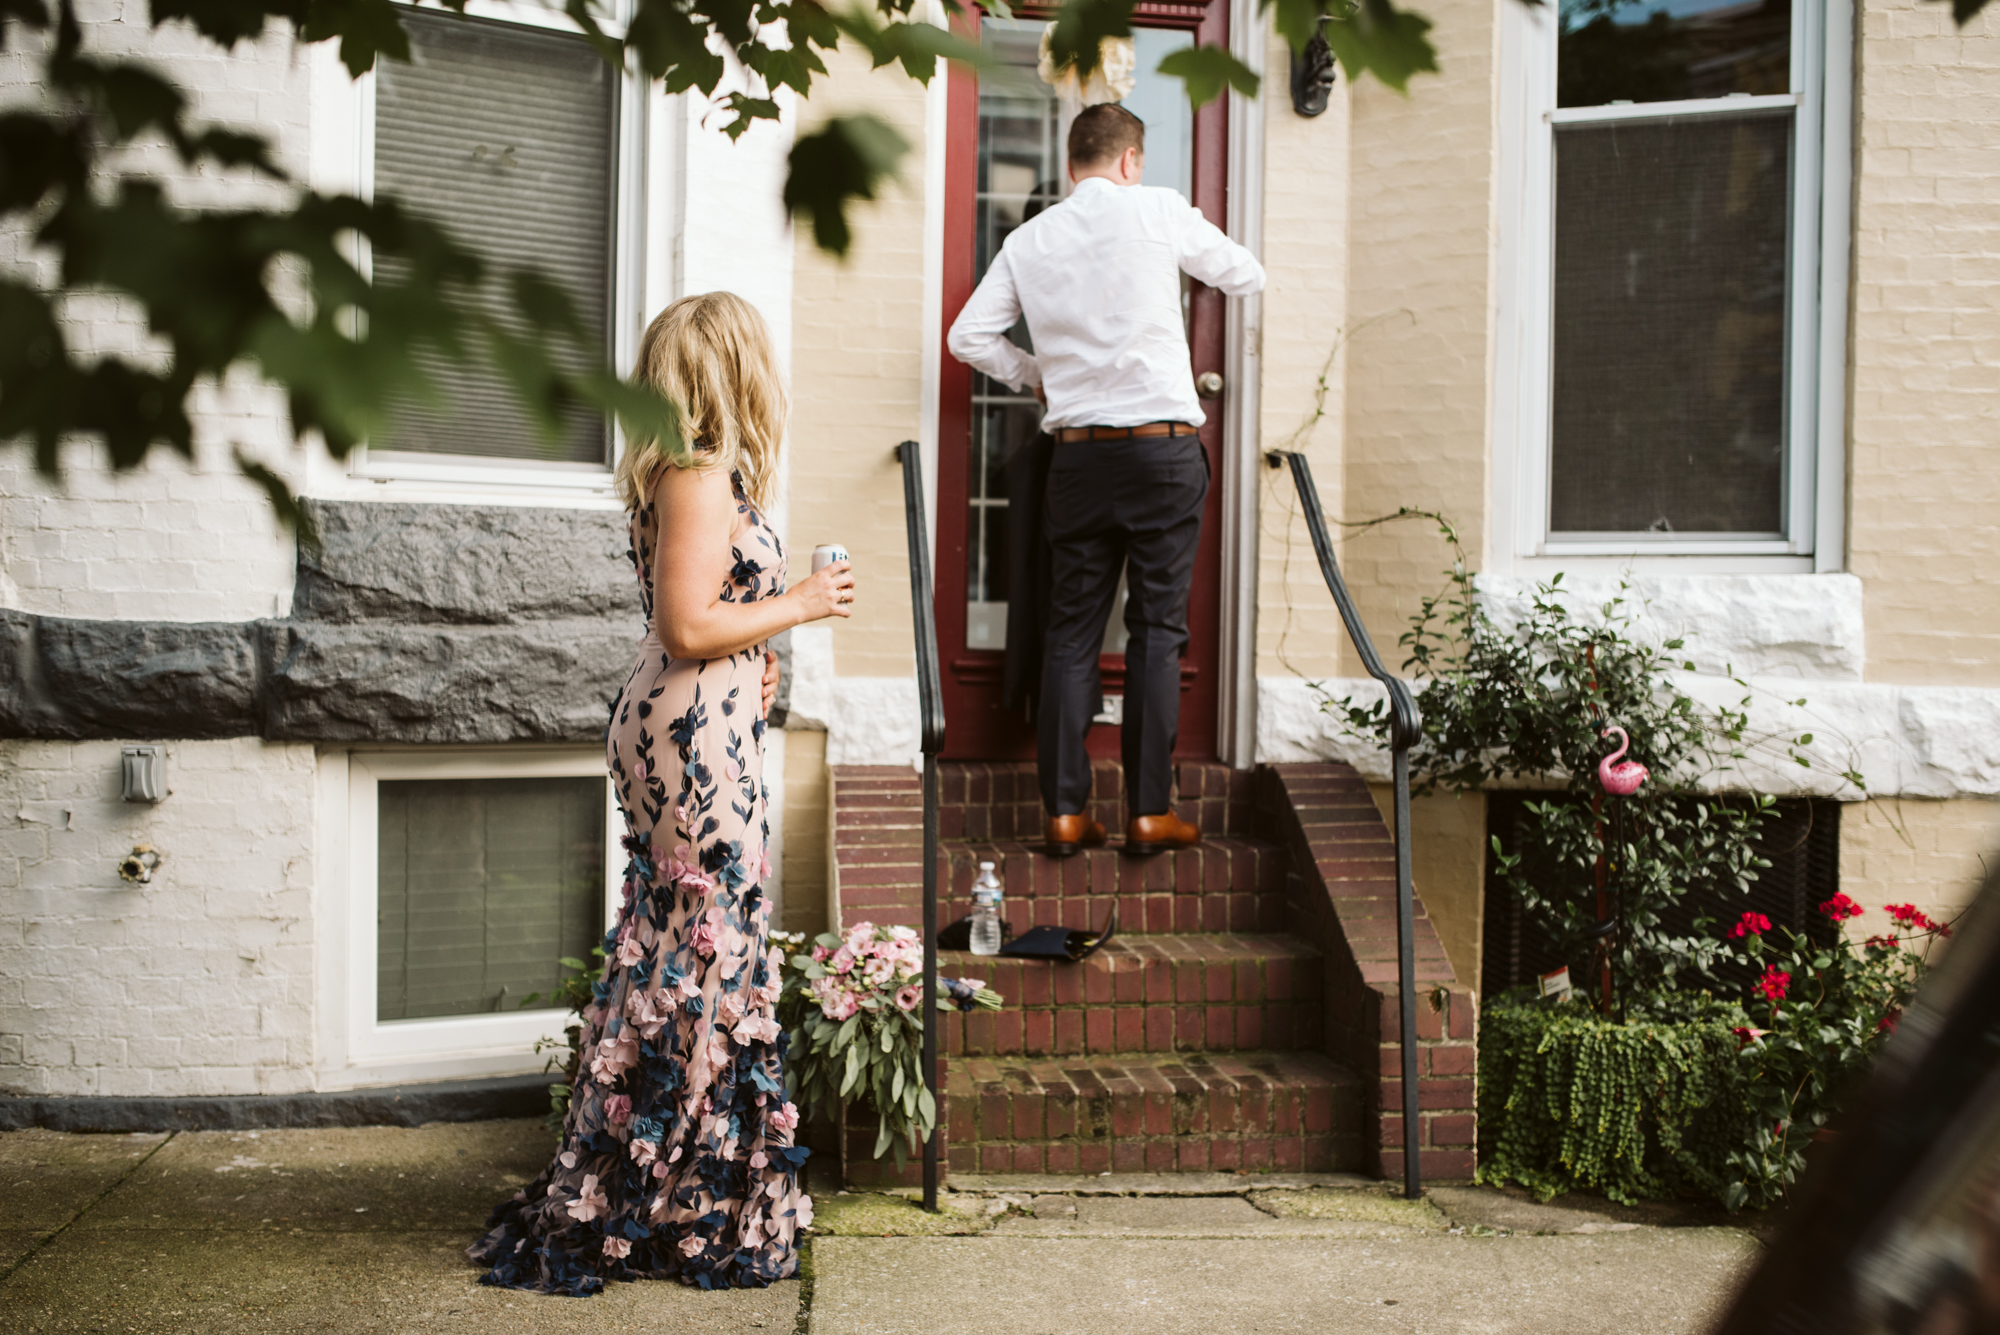 Pop-up Ceremony, Outdoor Wedding, Casual, Simple, Lake Roland, Baltimore, Maryland Wedding Photographer, Laid Back, Bride and Groom in Hampden, Rowhouse Baltimore